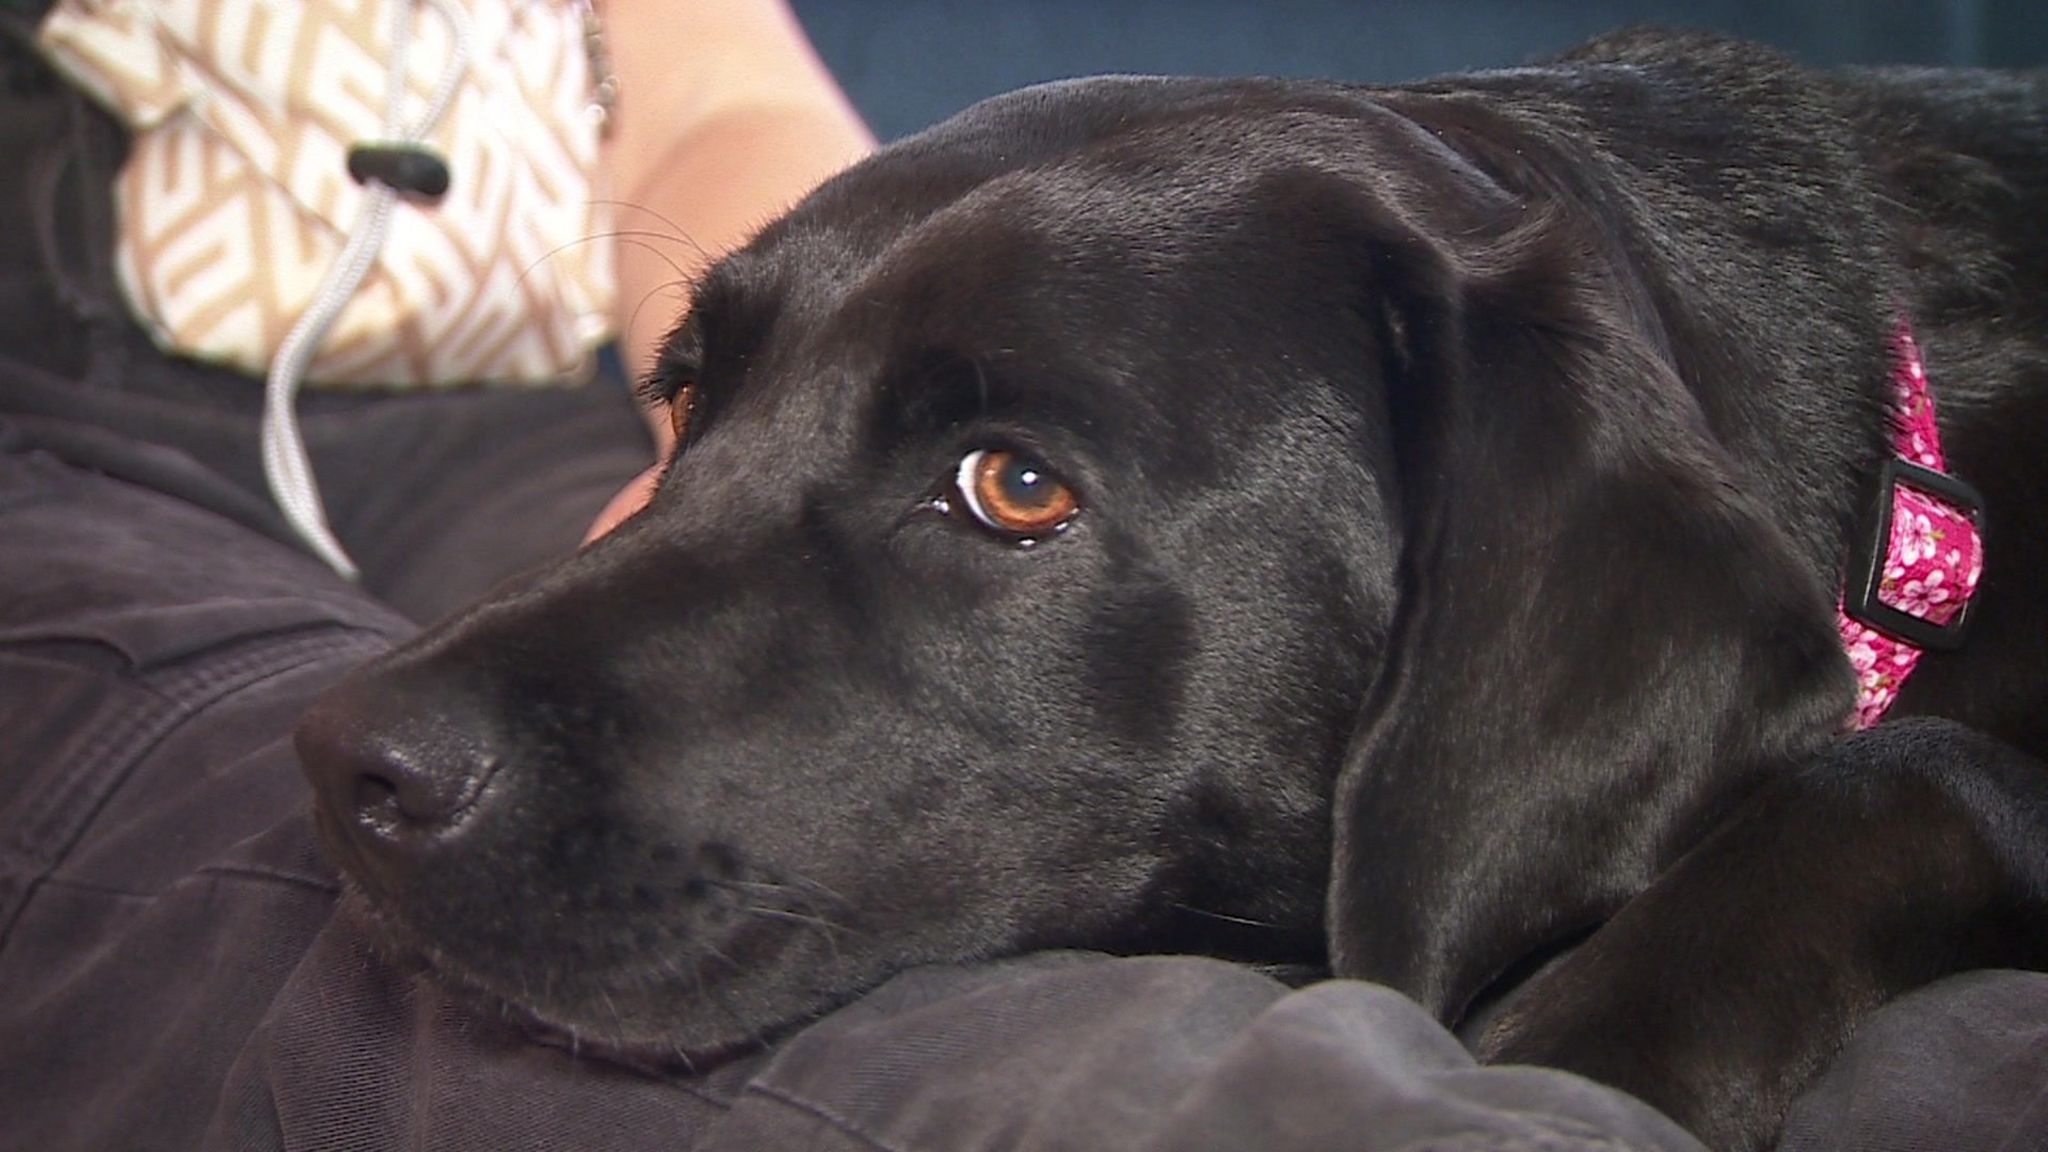 Close up of a black Labrador's head resting on a lap